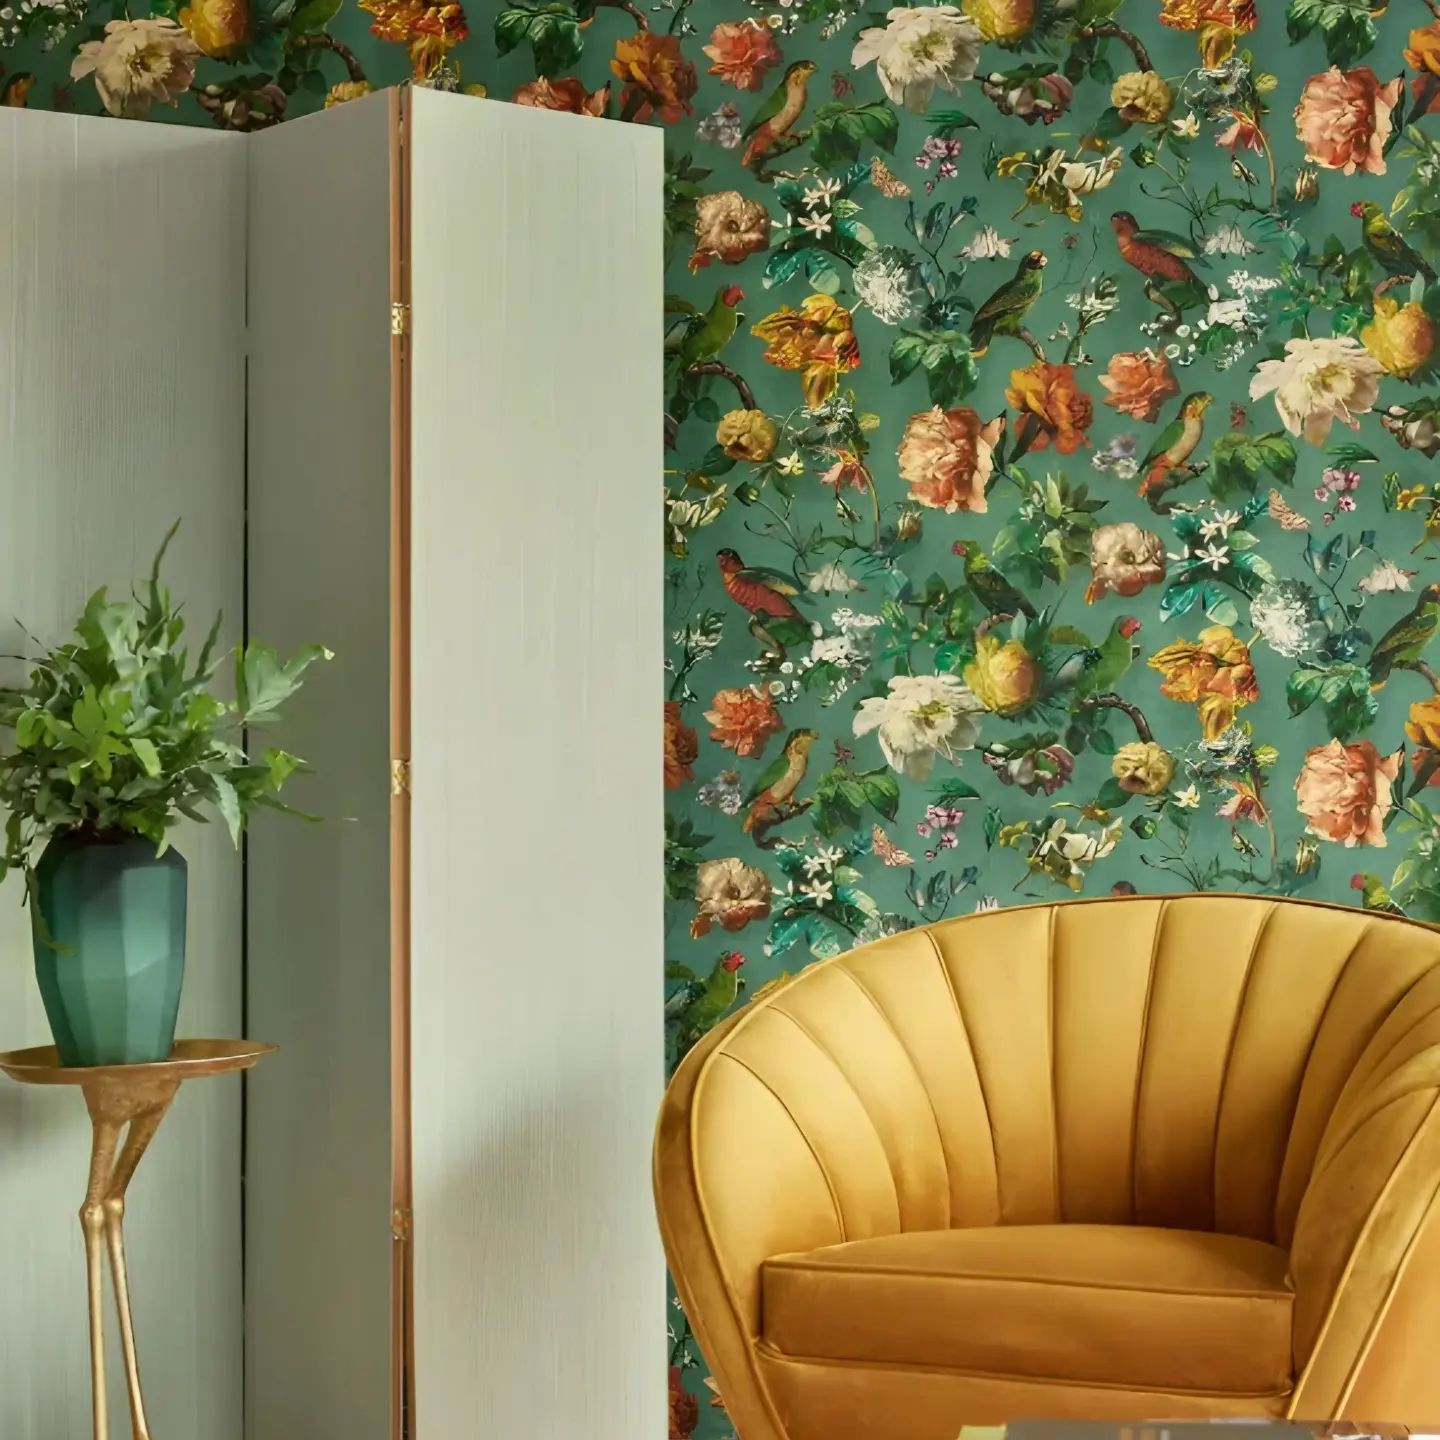 This stunning wallpaper by @eijffinger features beautiful detailed depictions of birds, flowers and leaves in various eye-catching colourways.

Available to order at stillorgandecor.ie for delivery nationwide or collection in-store.